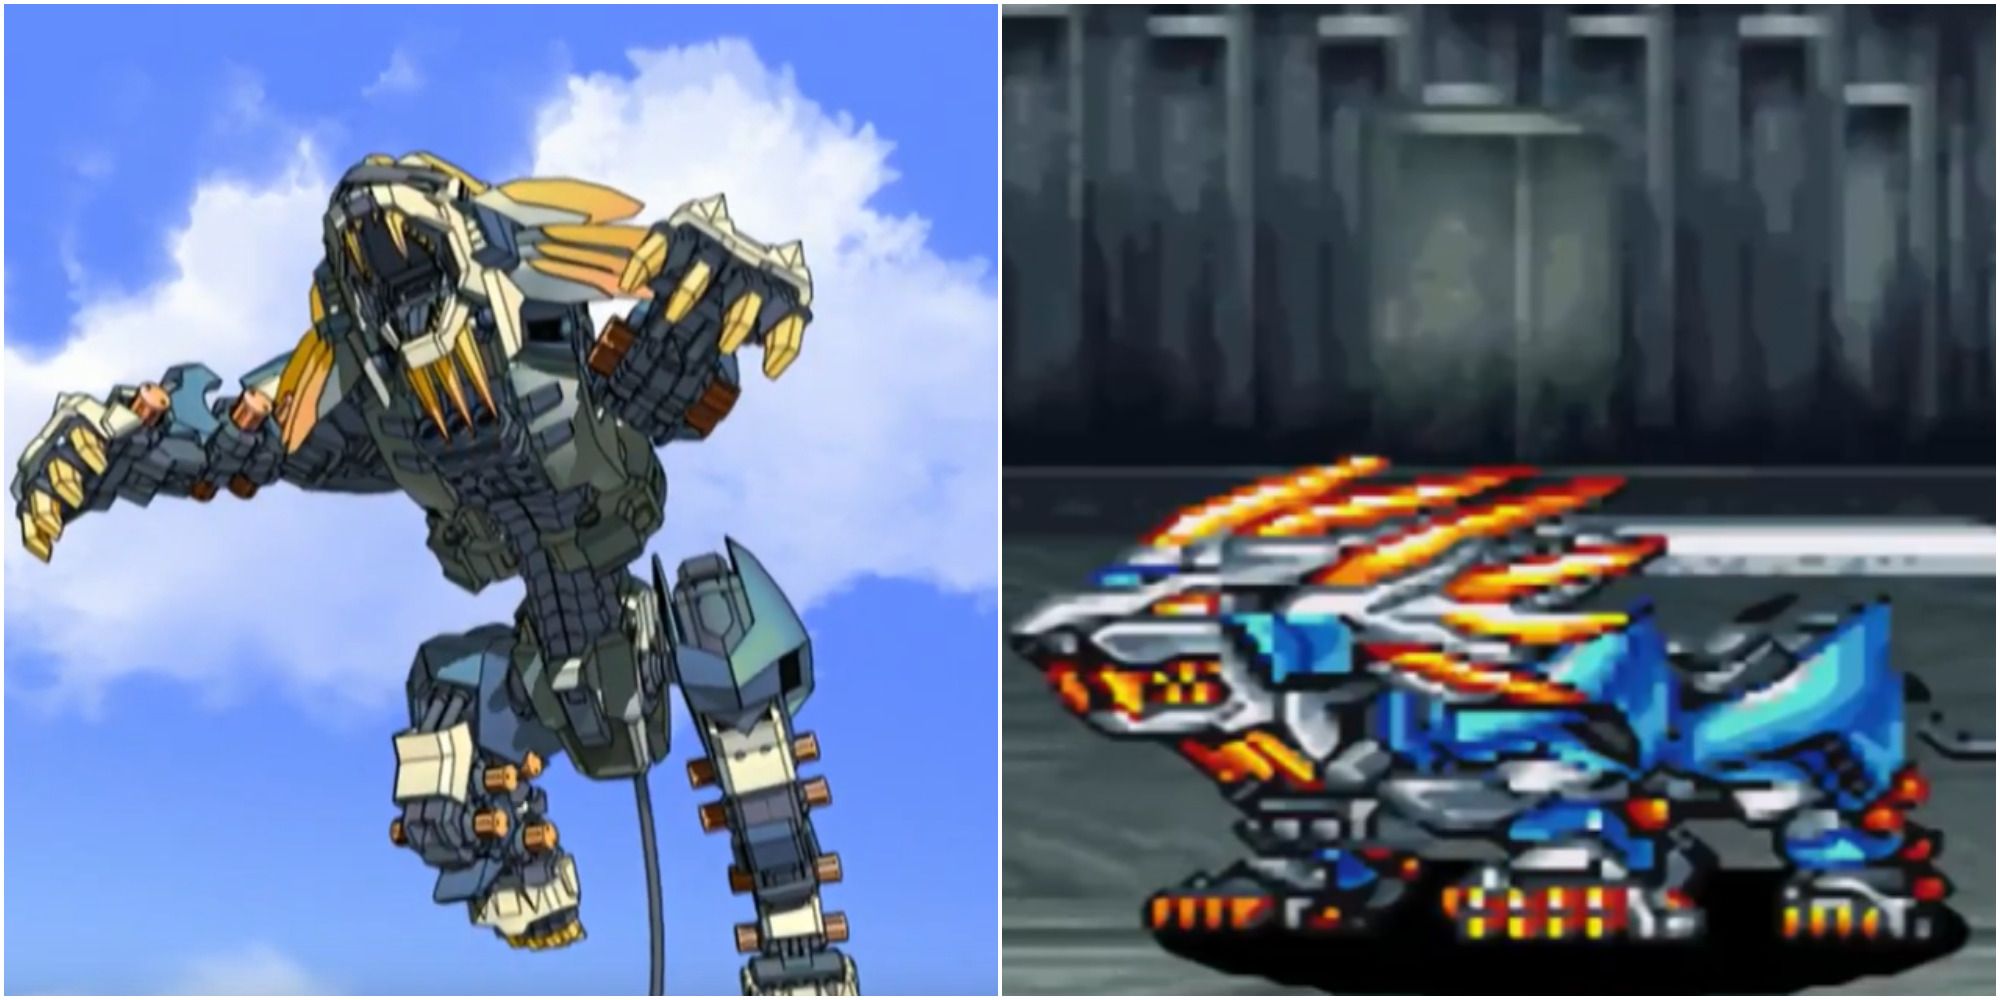 Appearance of Murasame Liger in Zoids:Genesis  anime & in Super Robot Wars